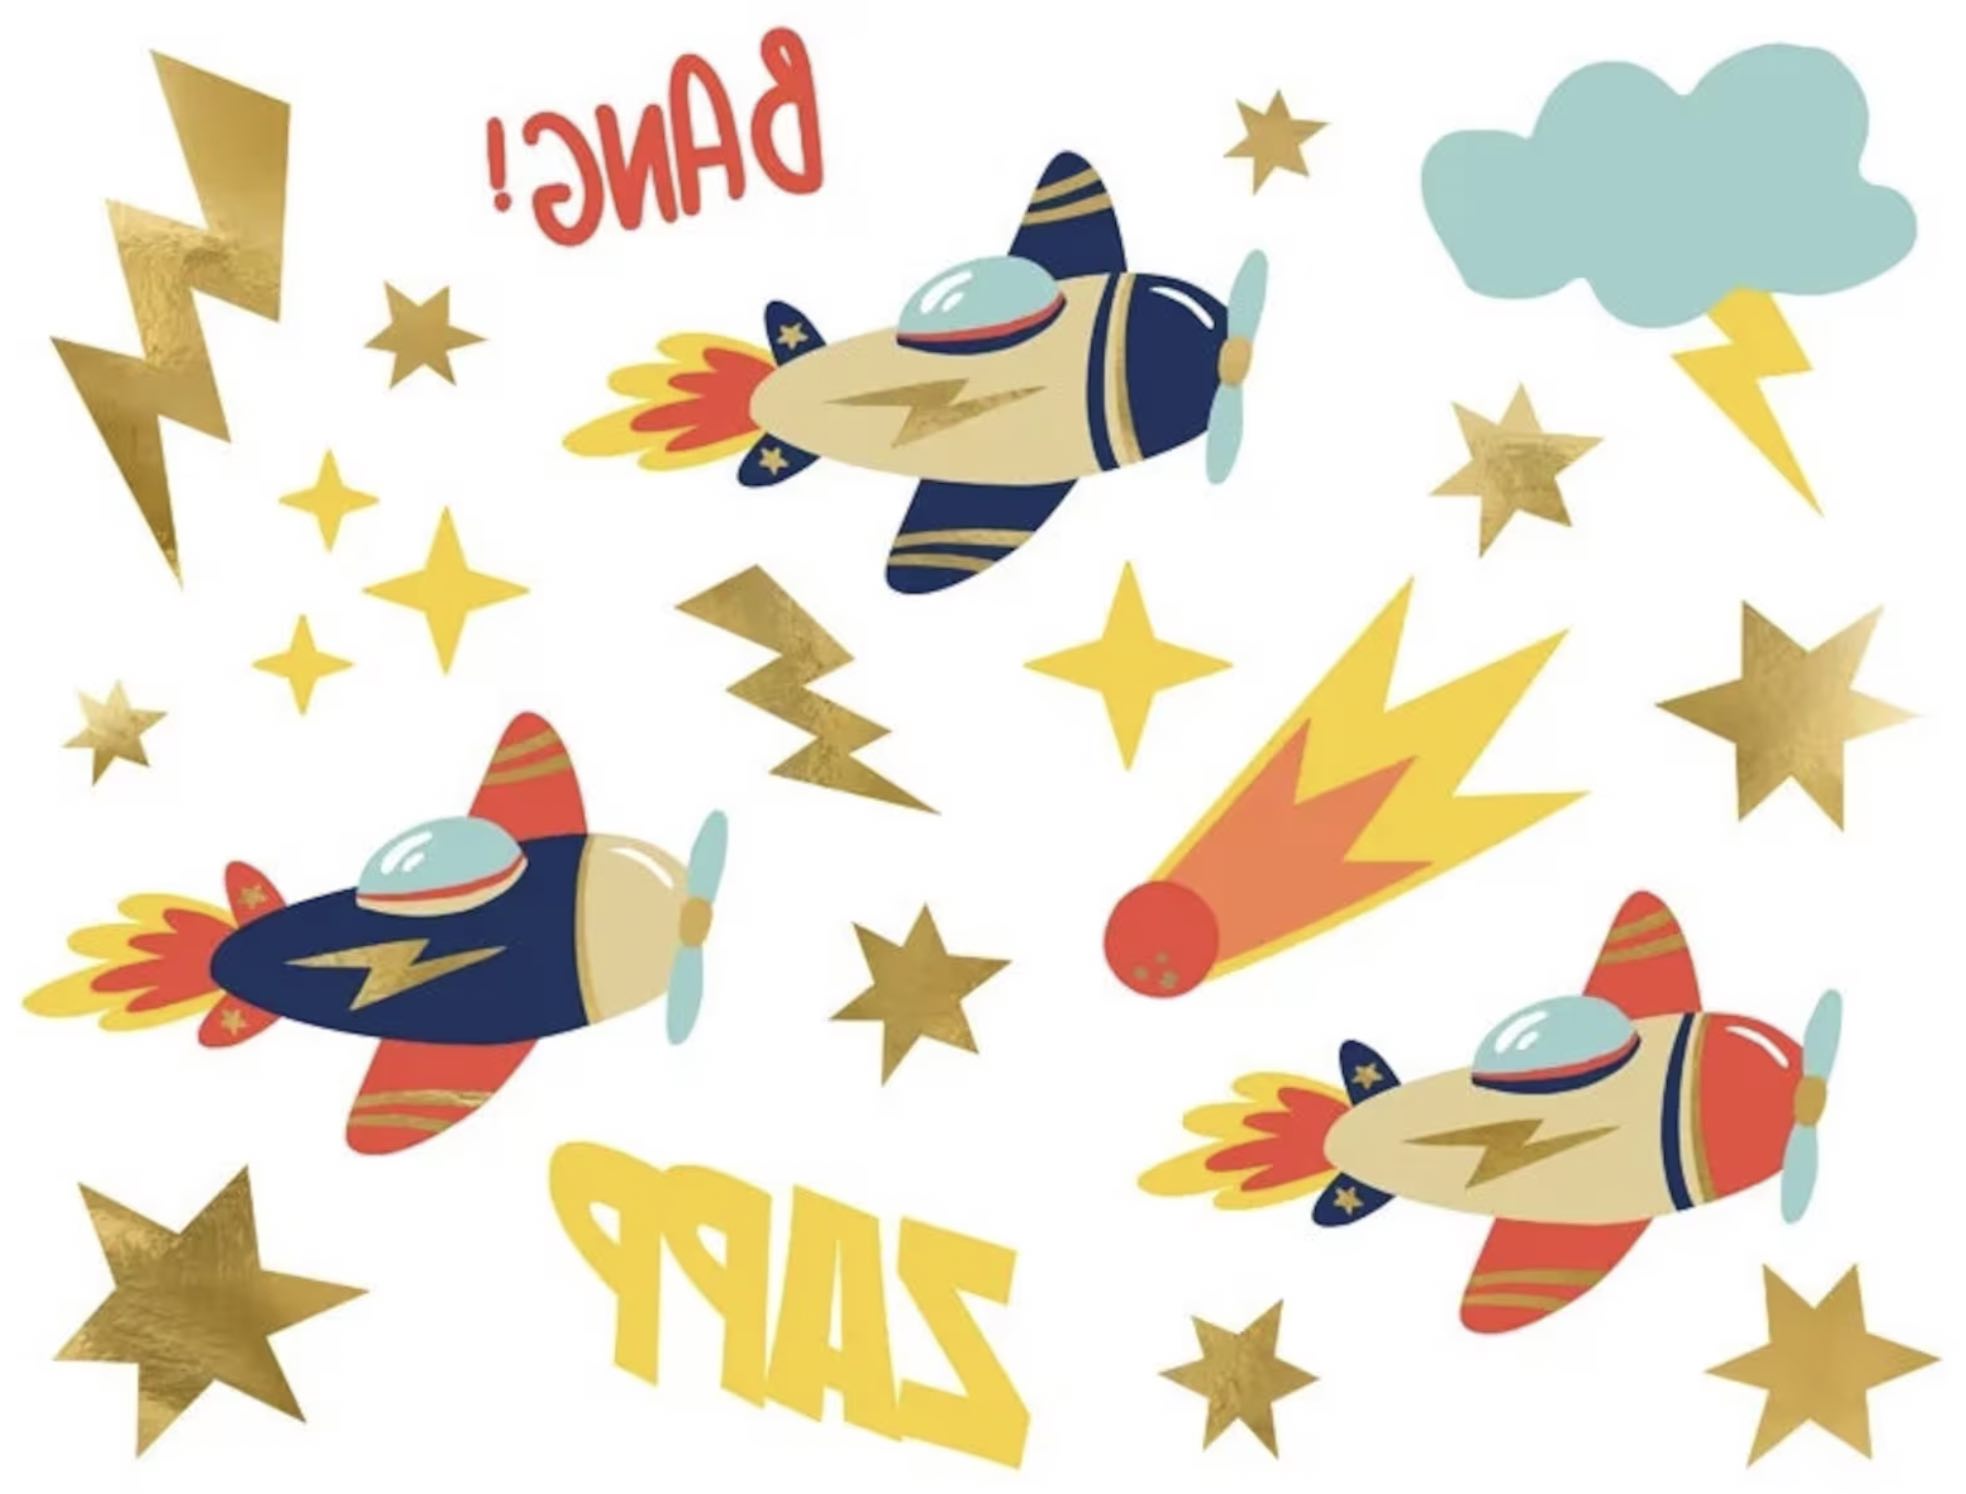 Planning an Airplane party for your little one? Make the party extra fun with these adorable temporary tattoos!